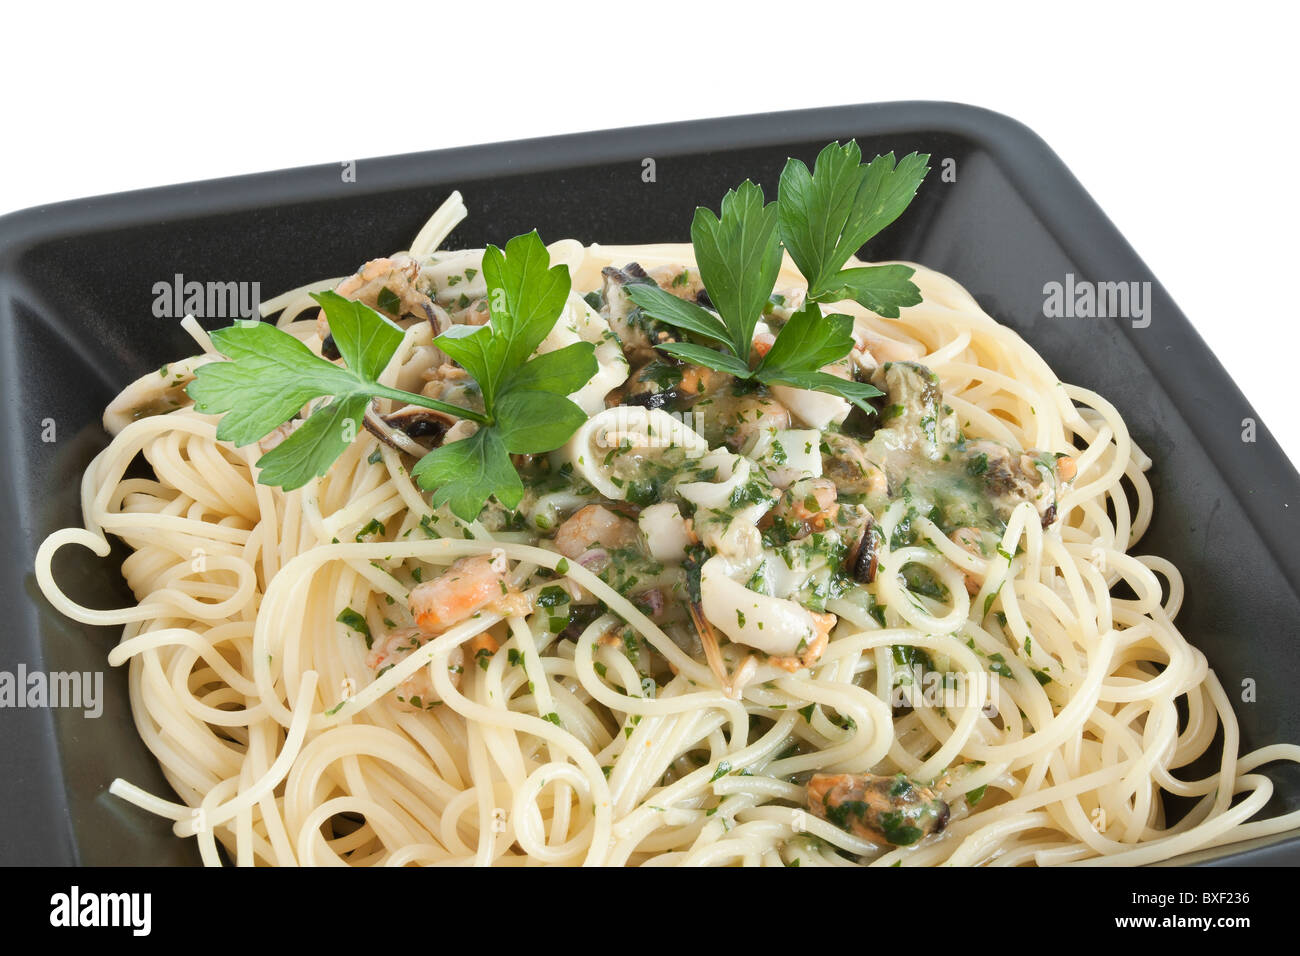 Spaghetti aux crevettes, calamars, moules et persil isolated on white Banque D'Images